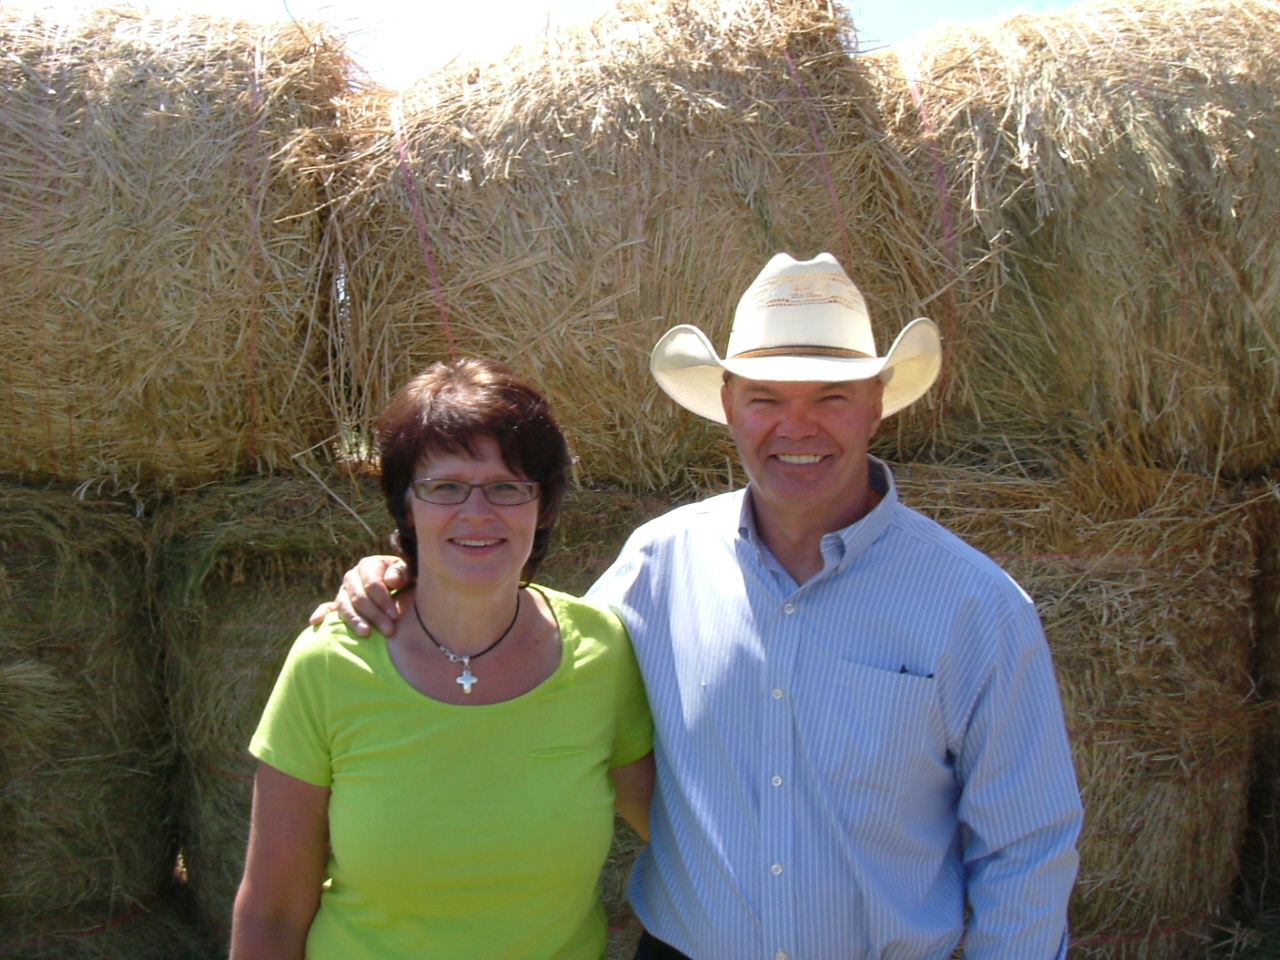 Founders, Rick and Corinne Aupperle